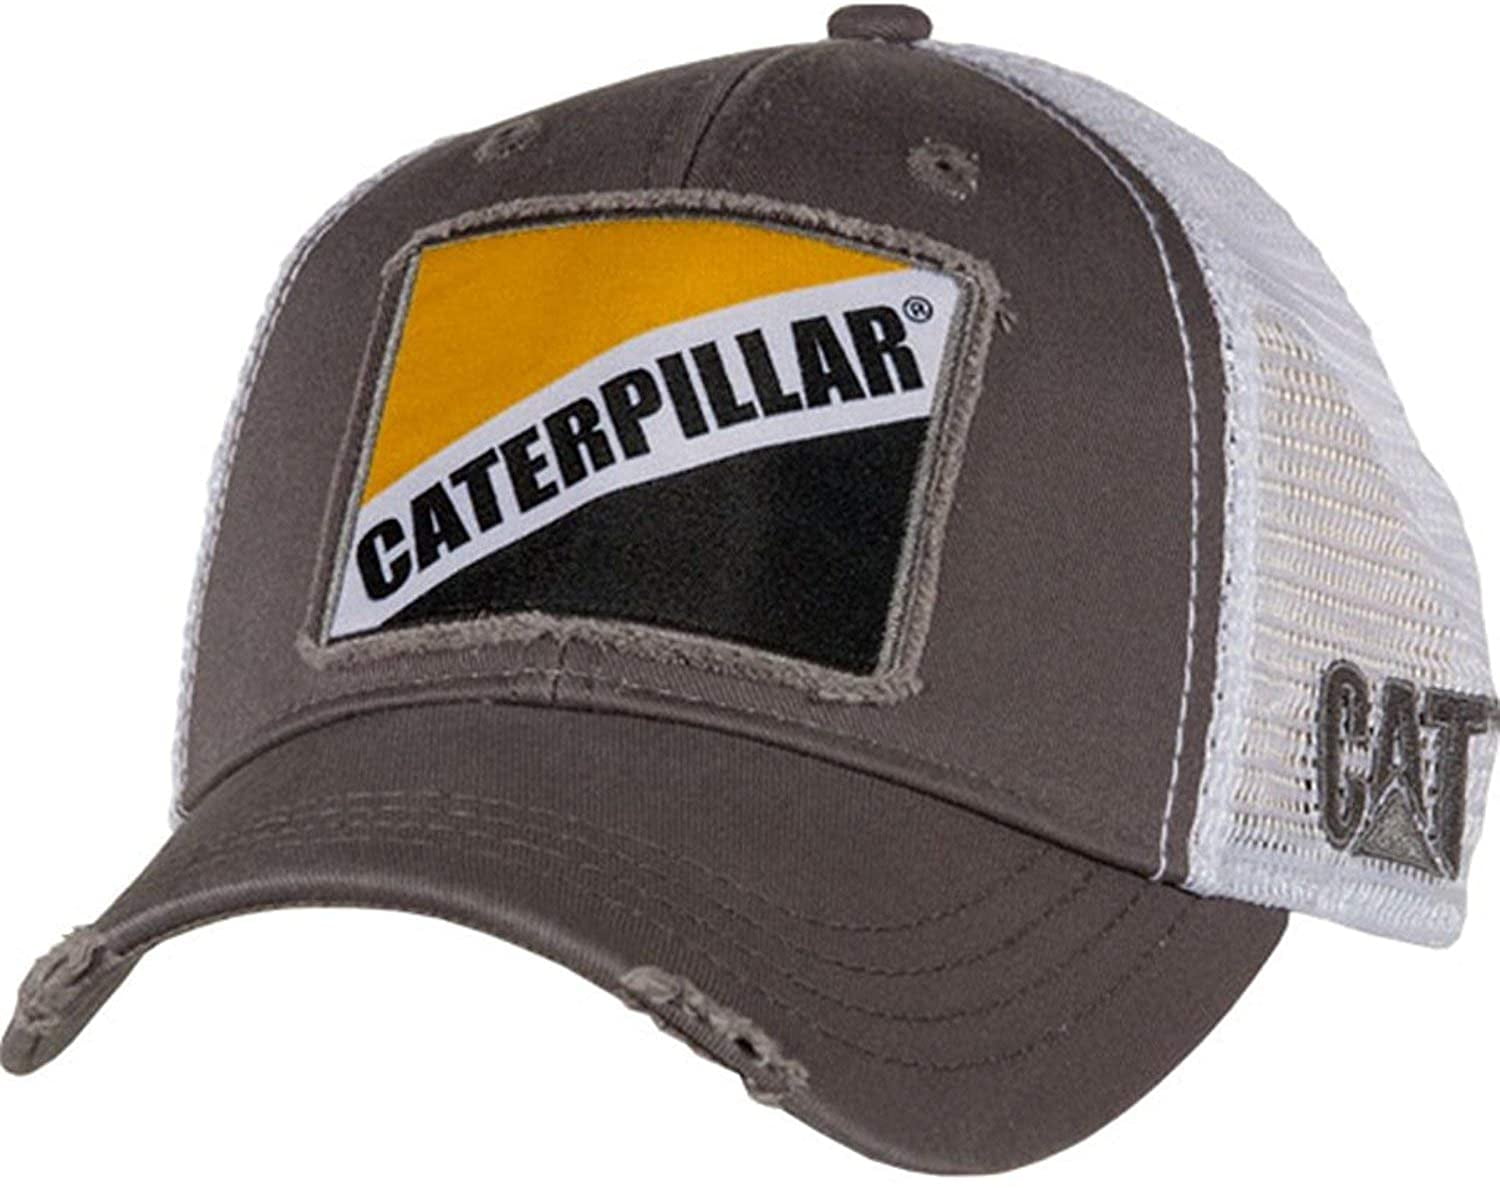 Caterpillar Cream and Red Cat Hat Cap with Brown Mesh Back 